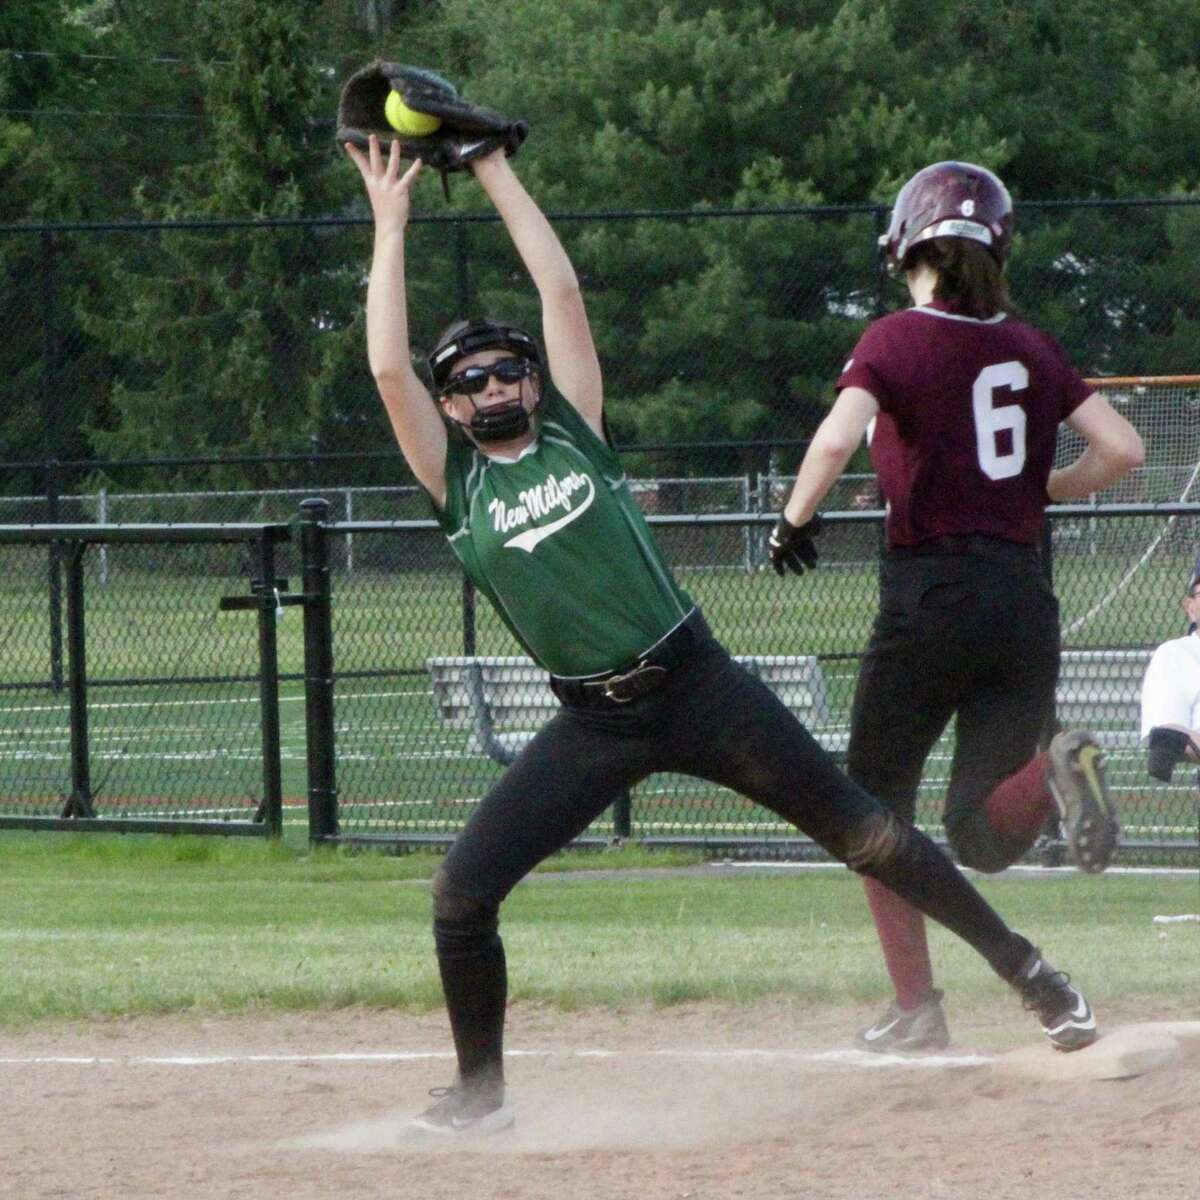 The New Milford High School JV softball team fell 6-3 to Bethel May 19. Second baseman, freshman Paige Duffany, covers the bag at first and makes the catch to get the out at first.